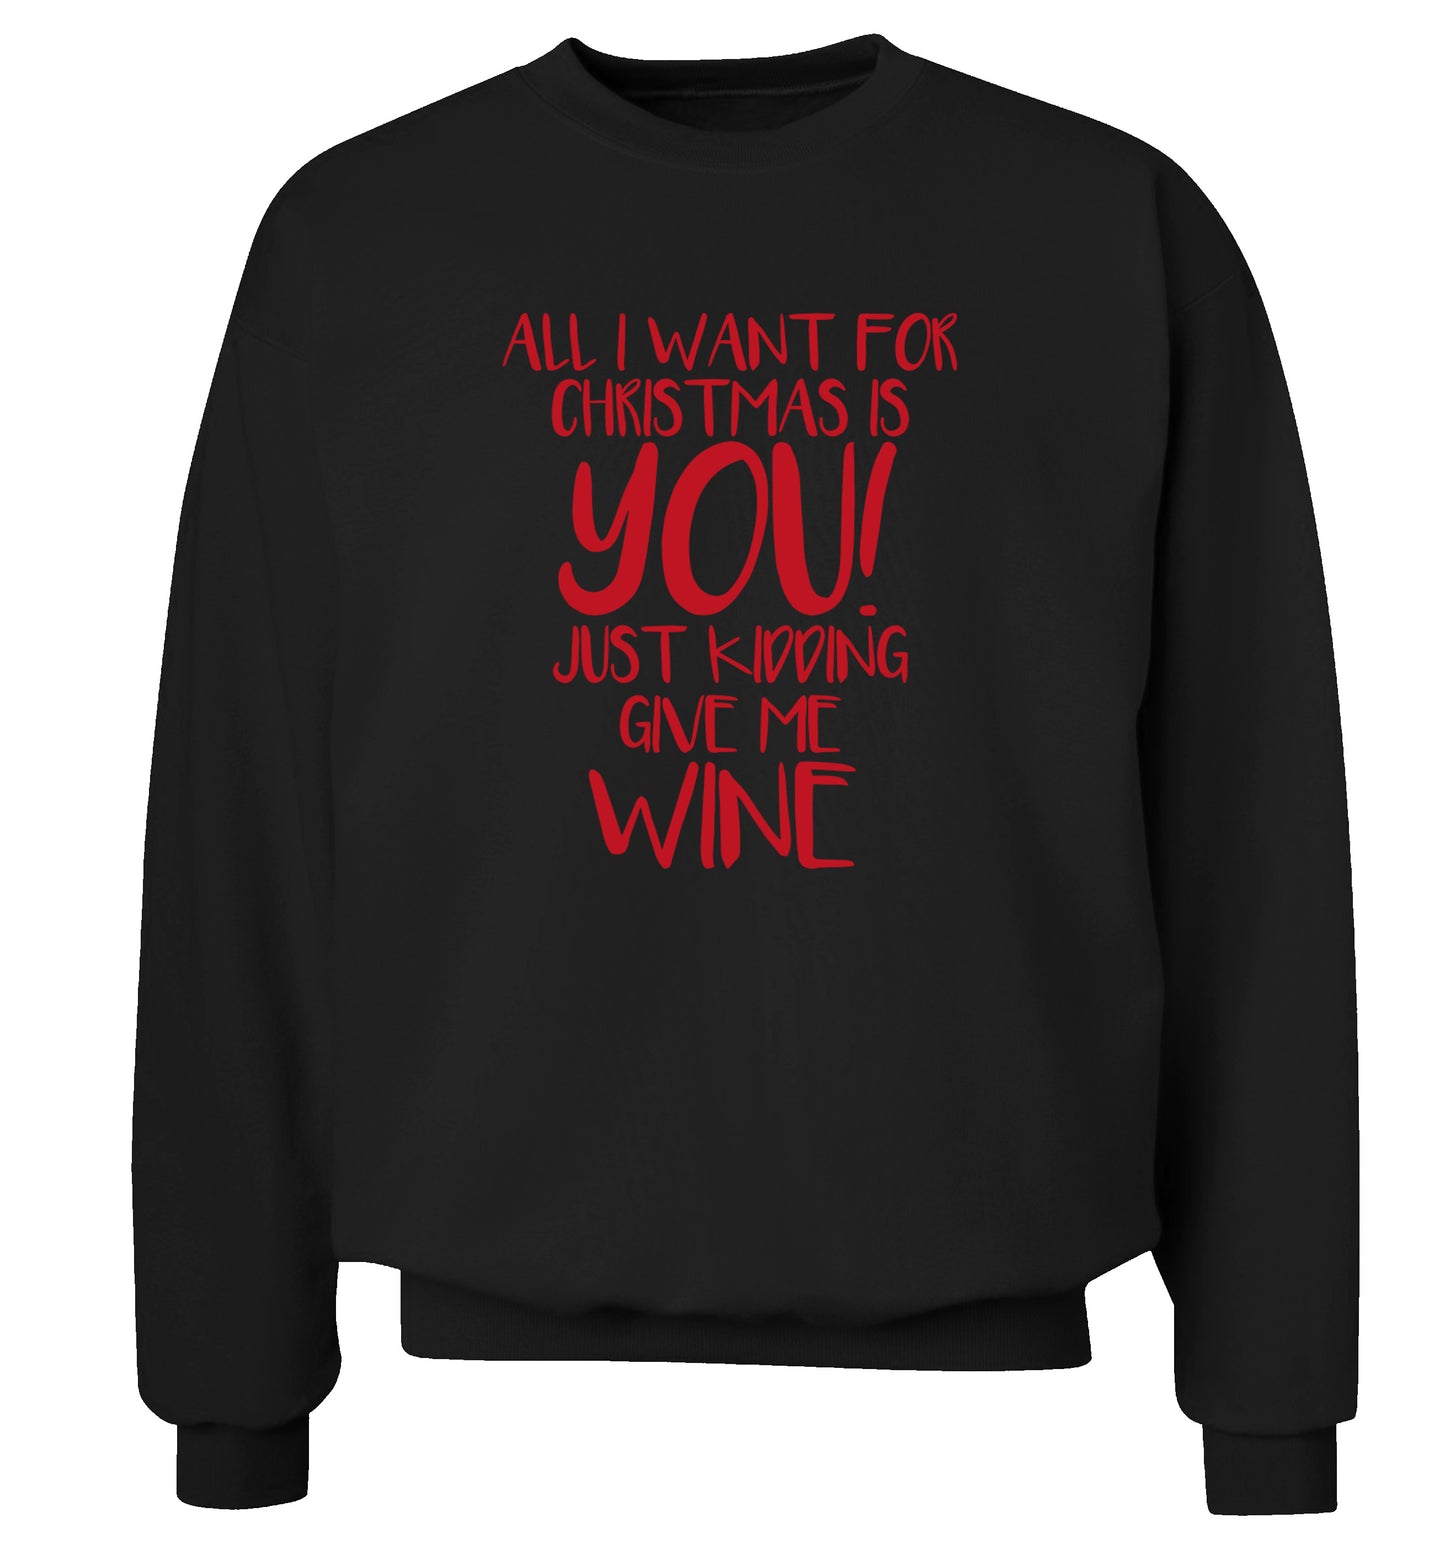 All I want for christmas is you just kidding give me the wine Adult's unisex black Sweater 2XL